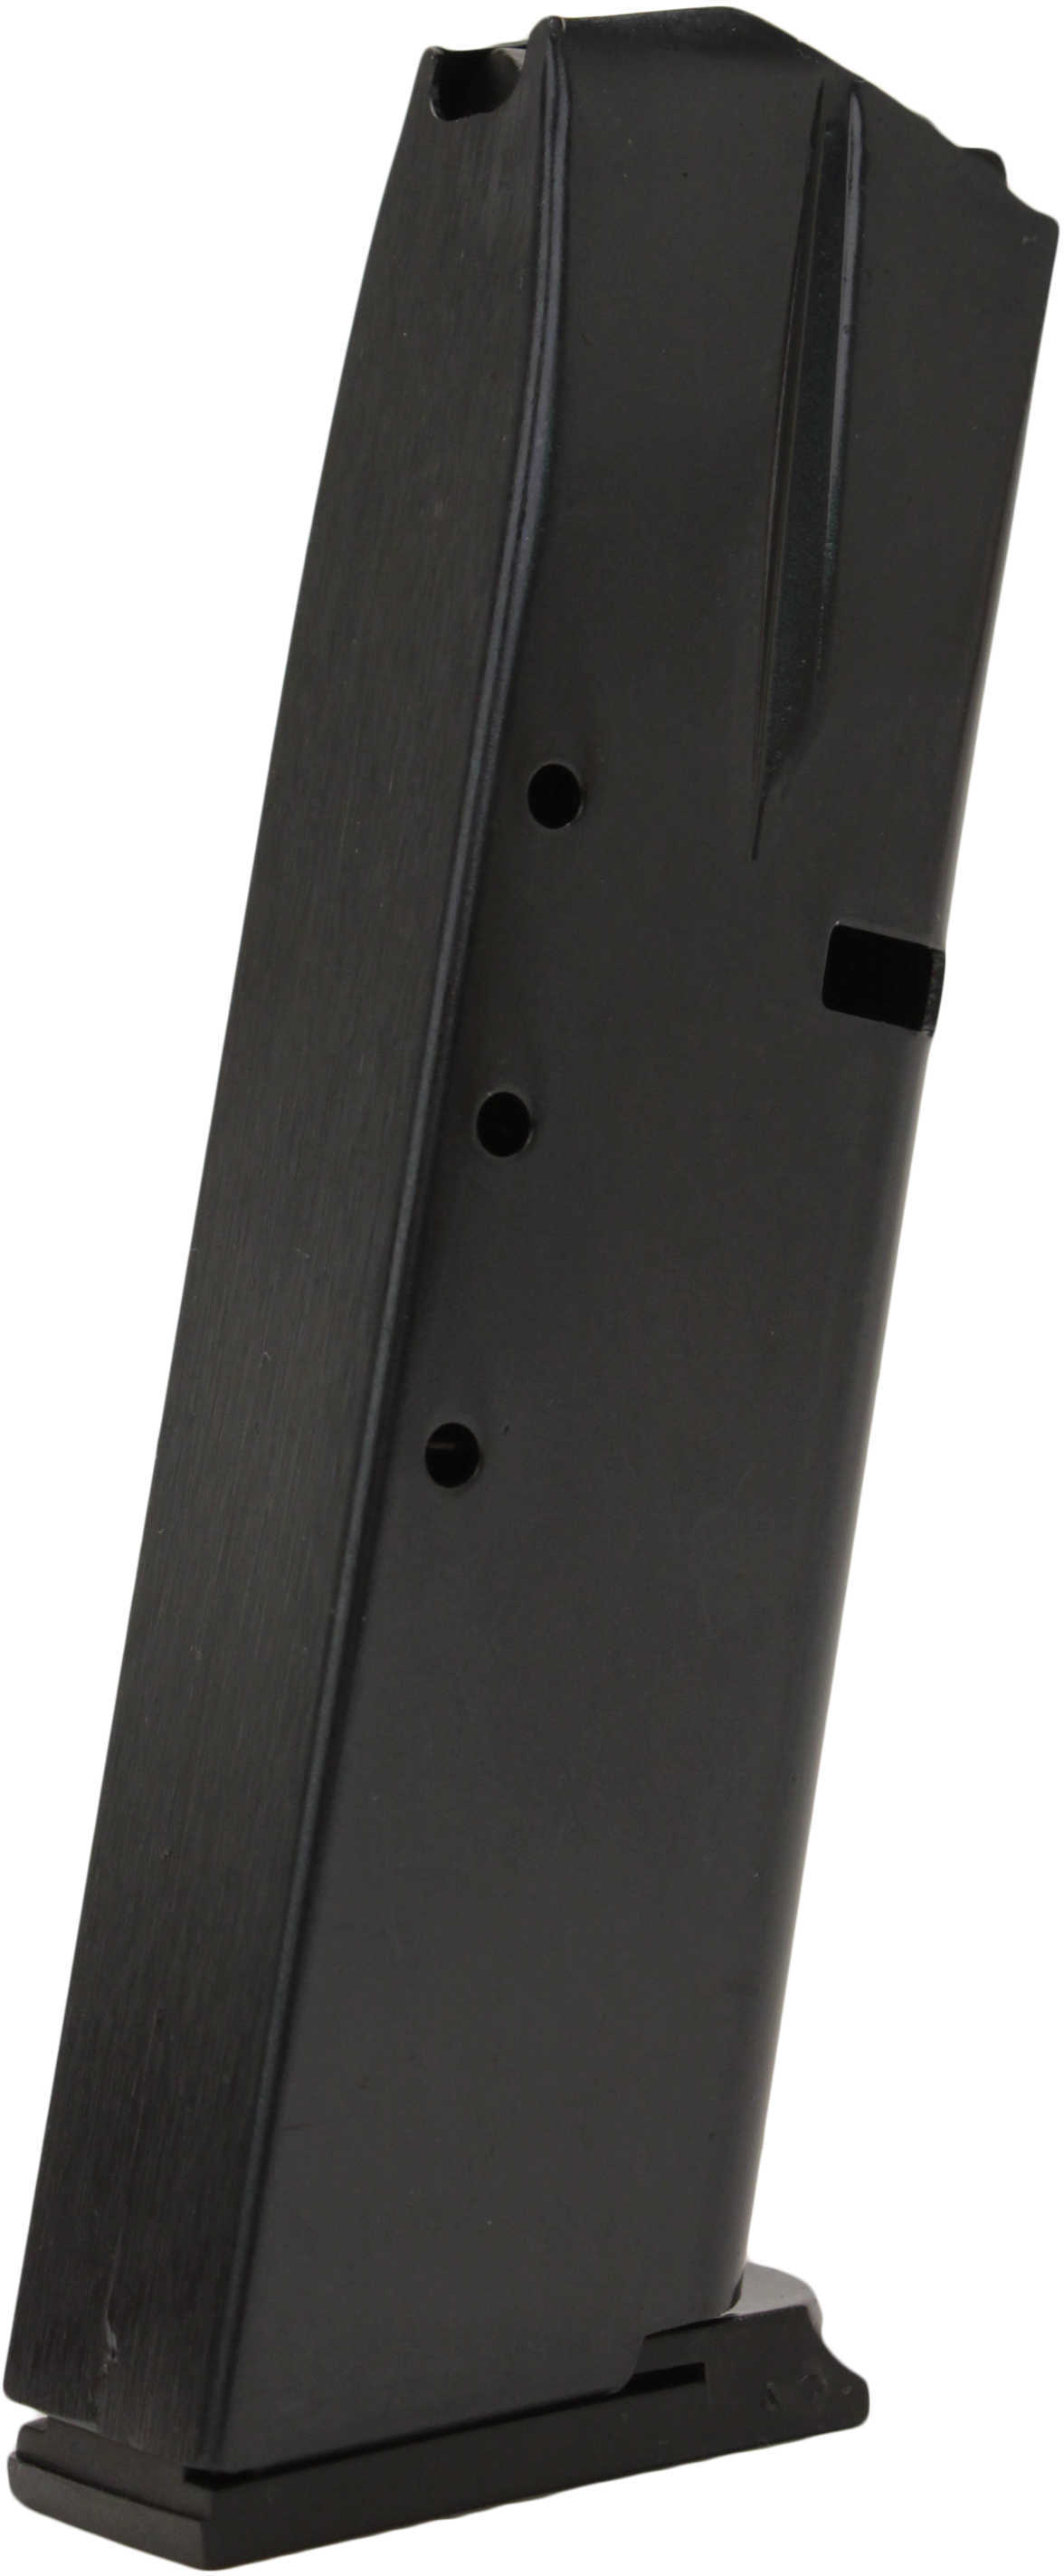 ProMag SMIAI S&W 5900 9mm Luger 15 Round Steel Blued Finish